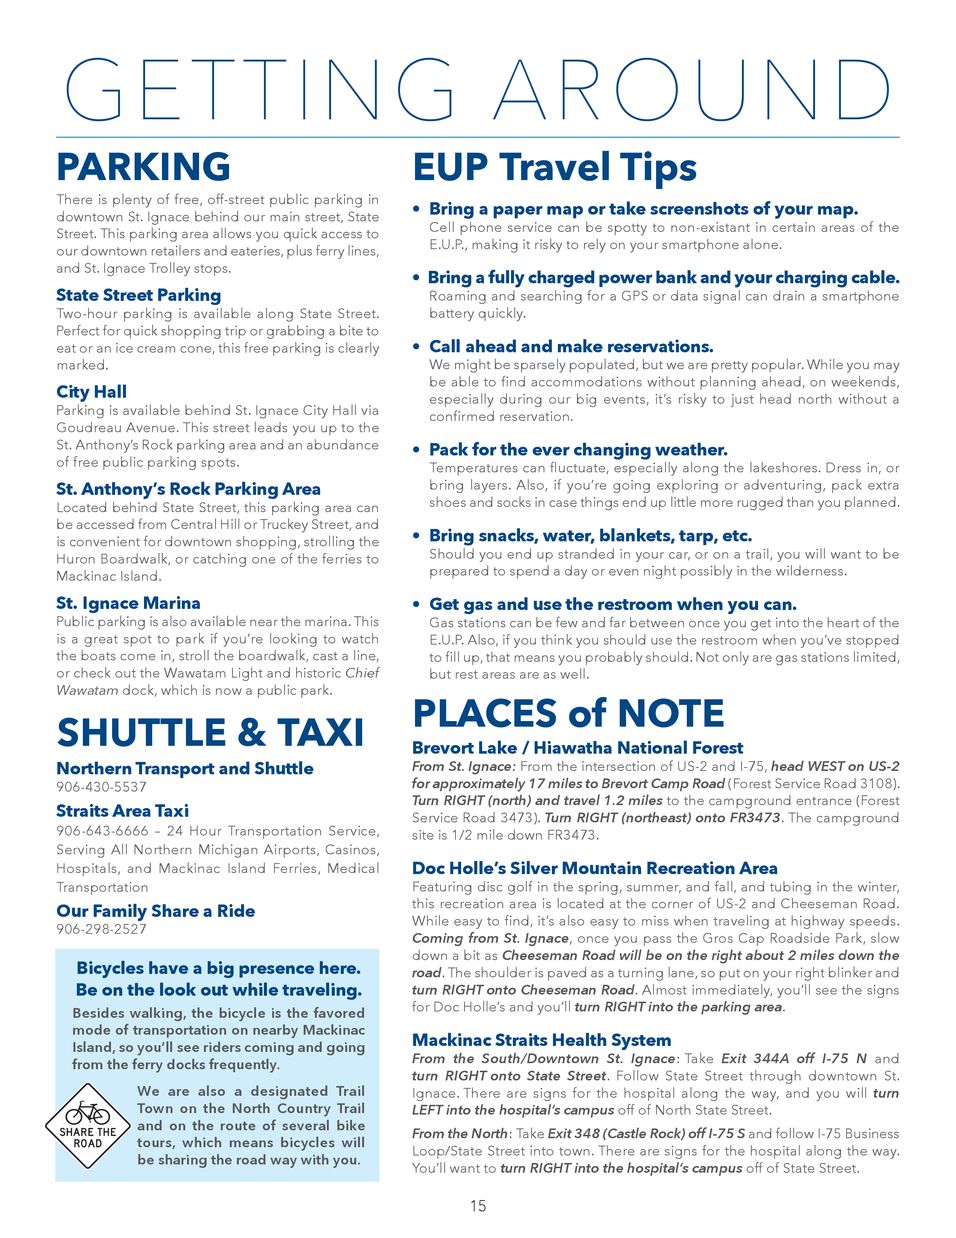 Experience St. Ignace - Guest Travel Guide 2023 - page 15